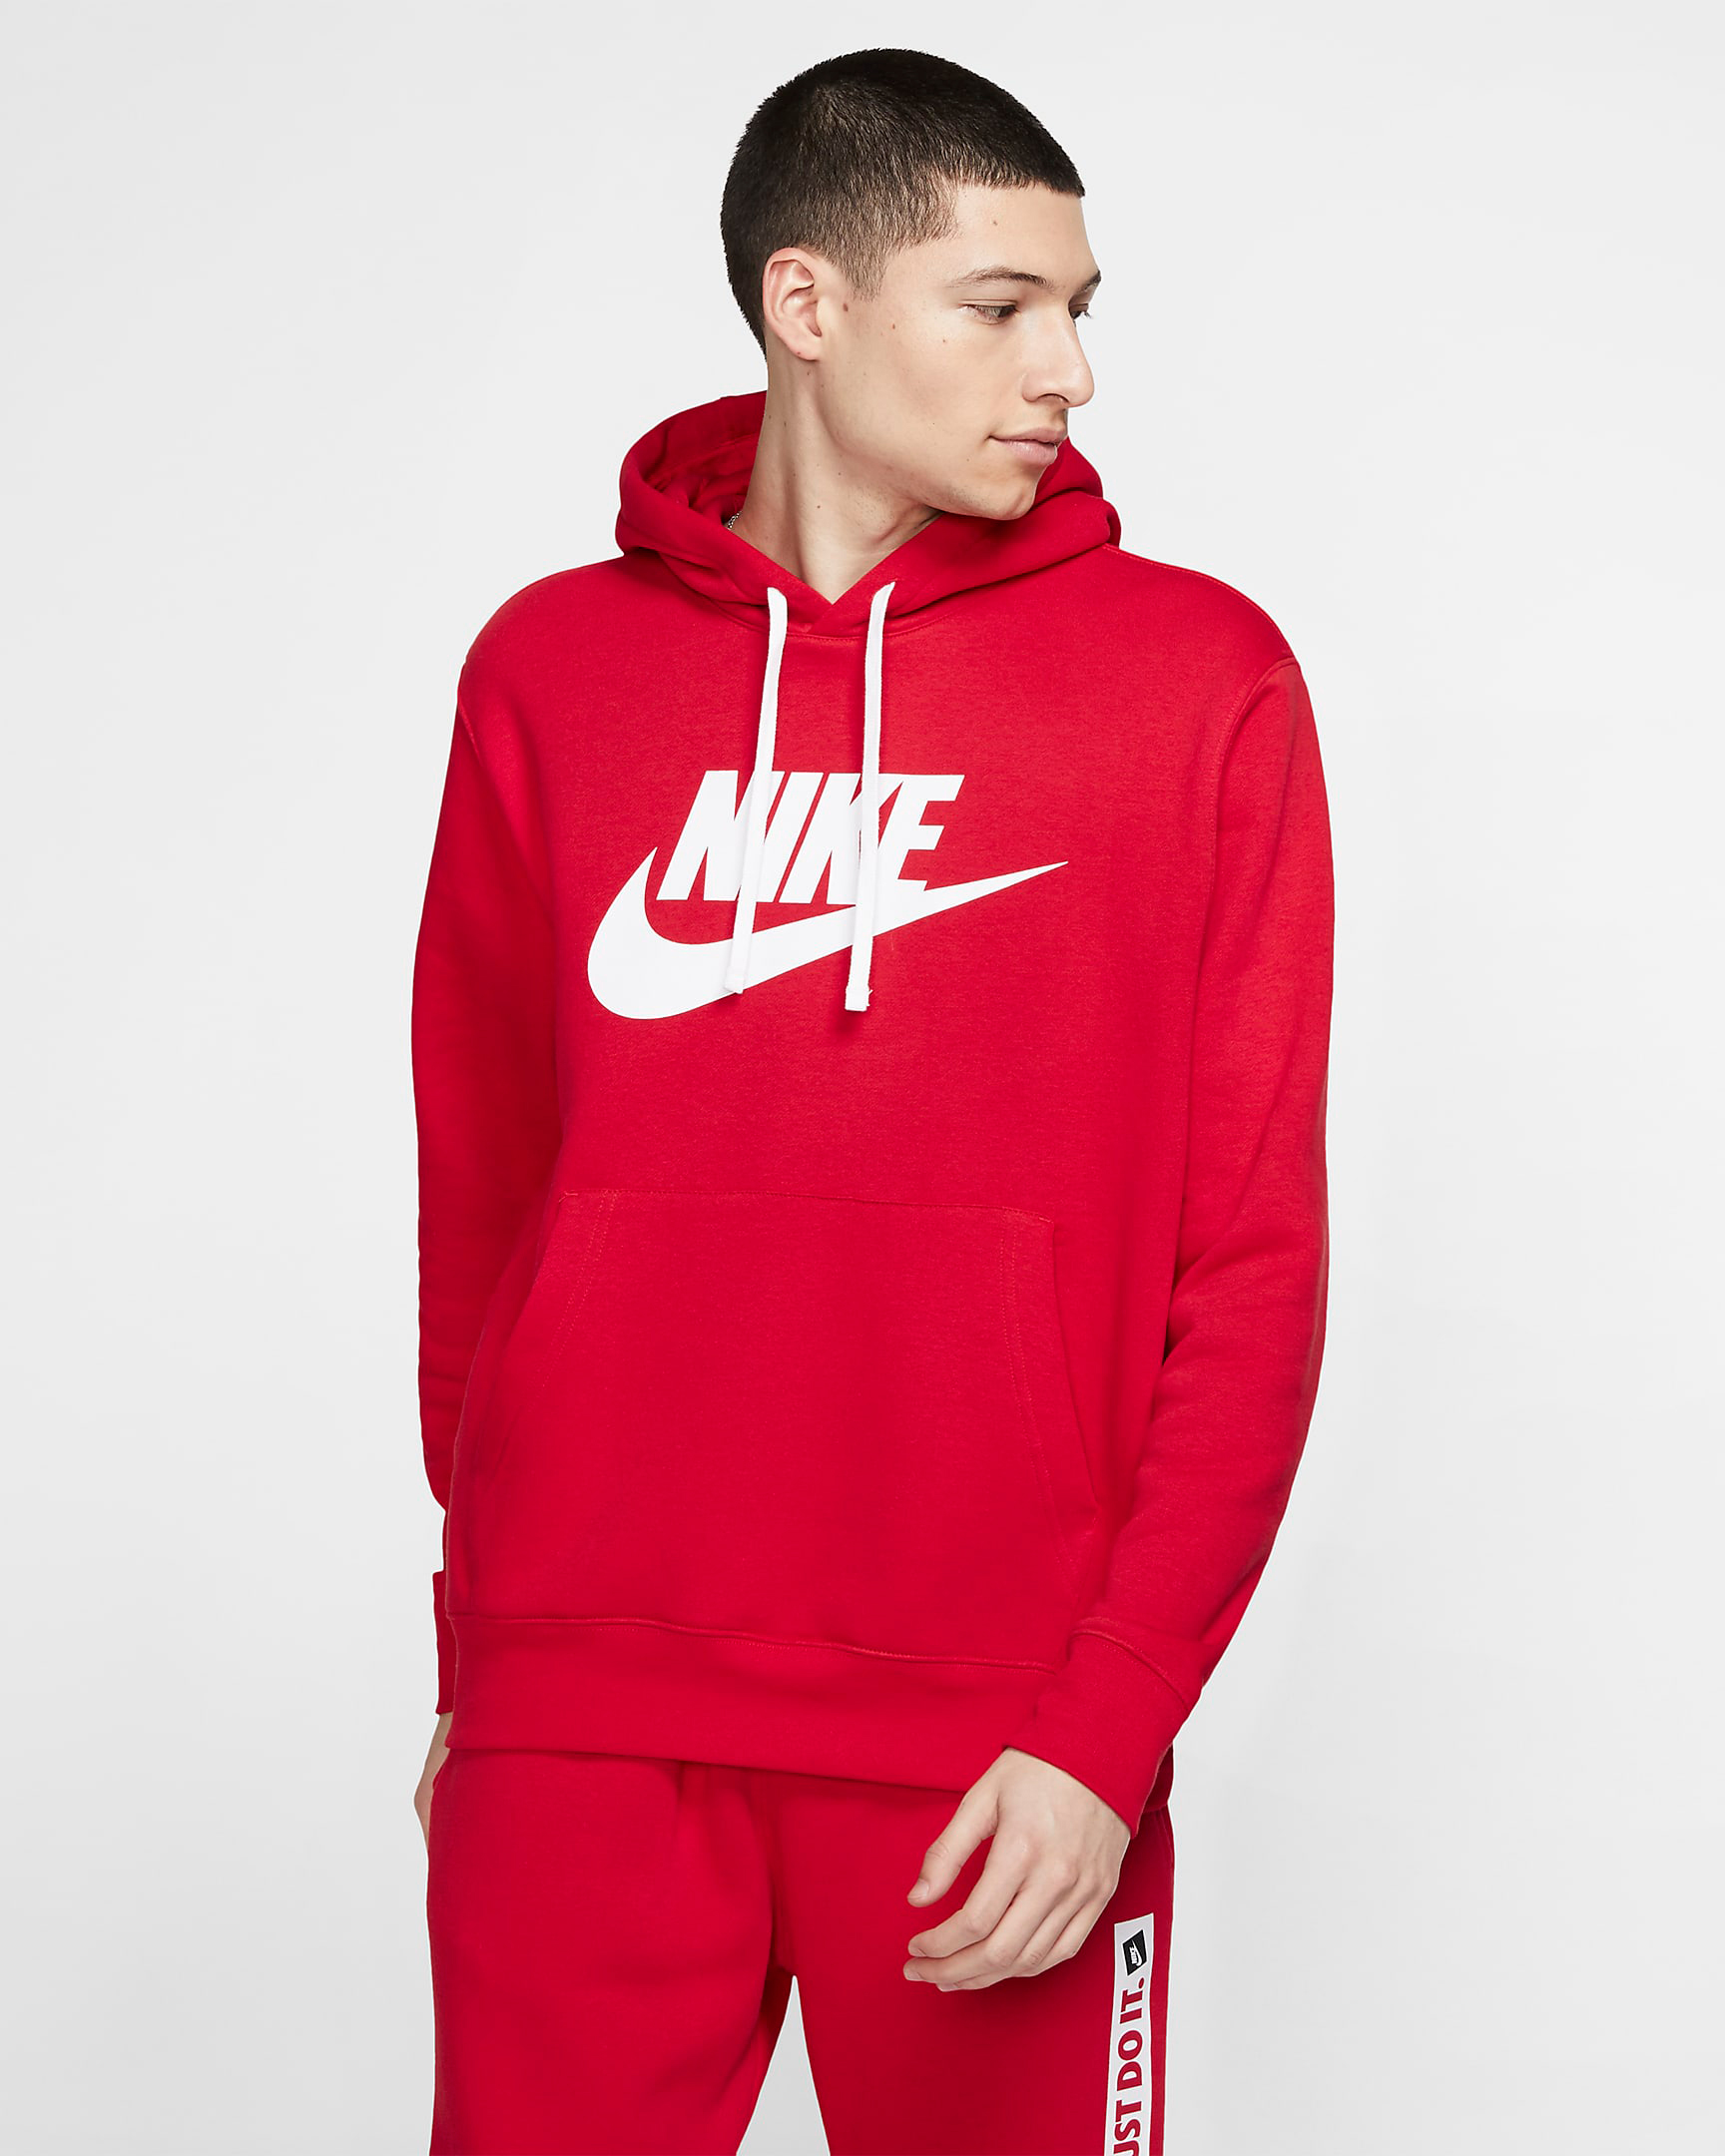 Nike Dunk High Championship Red Shirts Hats Clothing Outfits